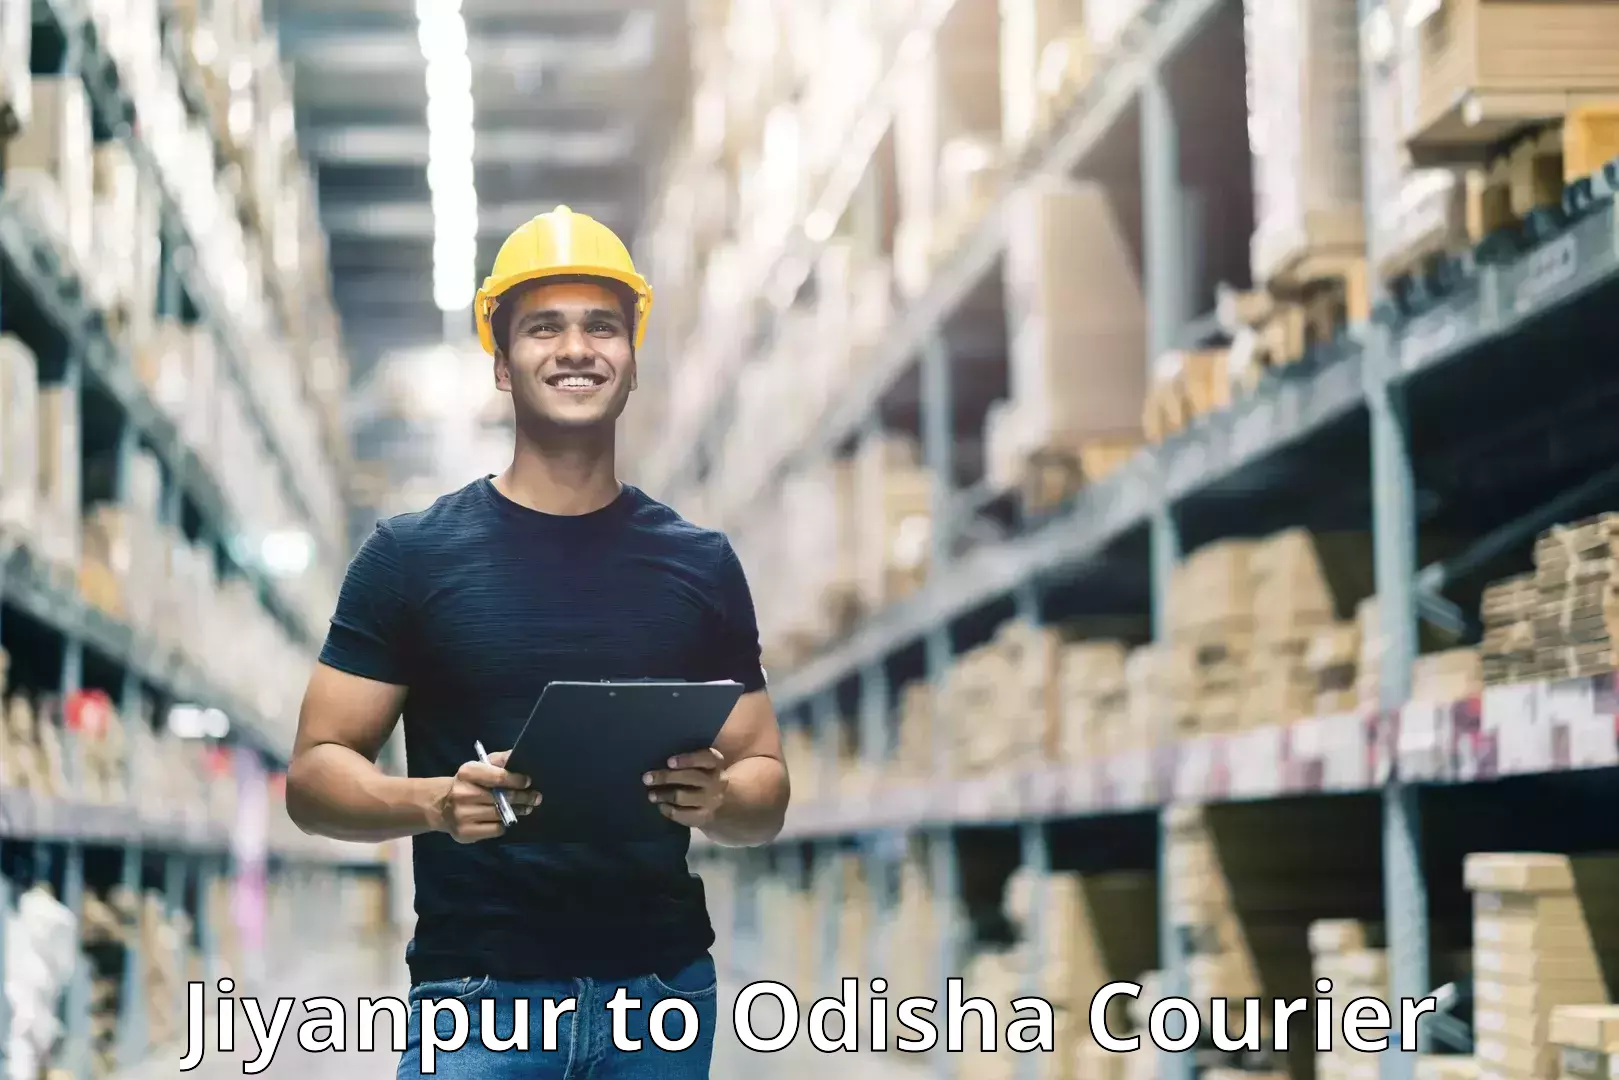 On-call courier service Jiyanpur to Talcher